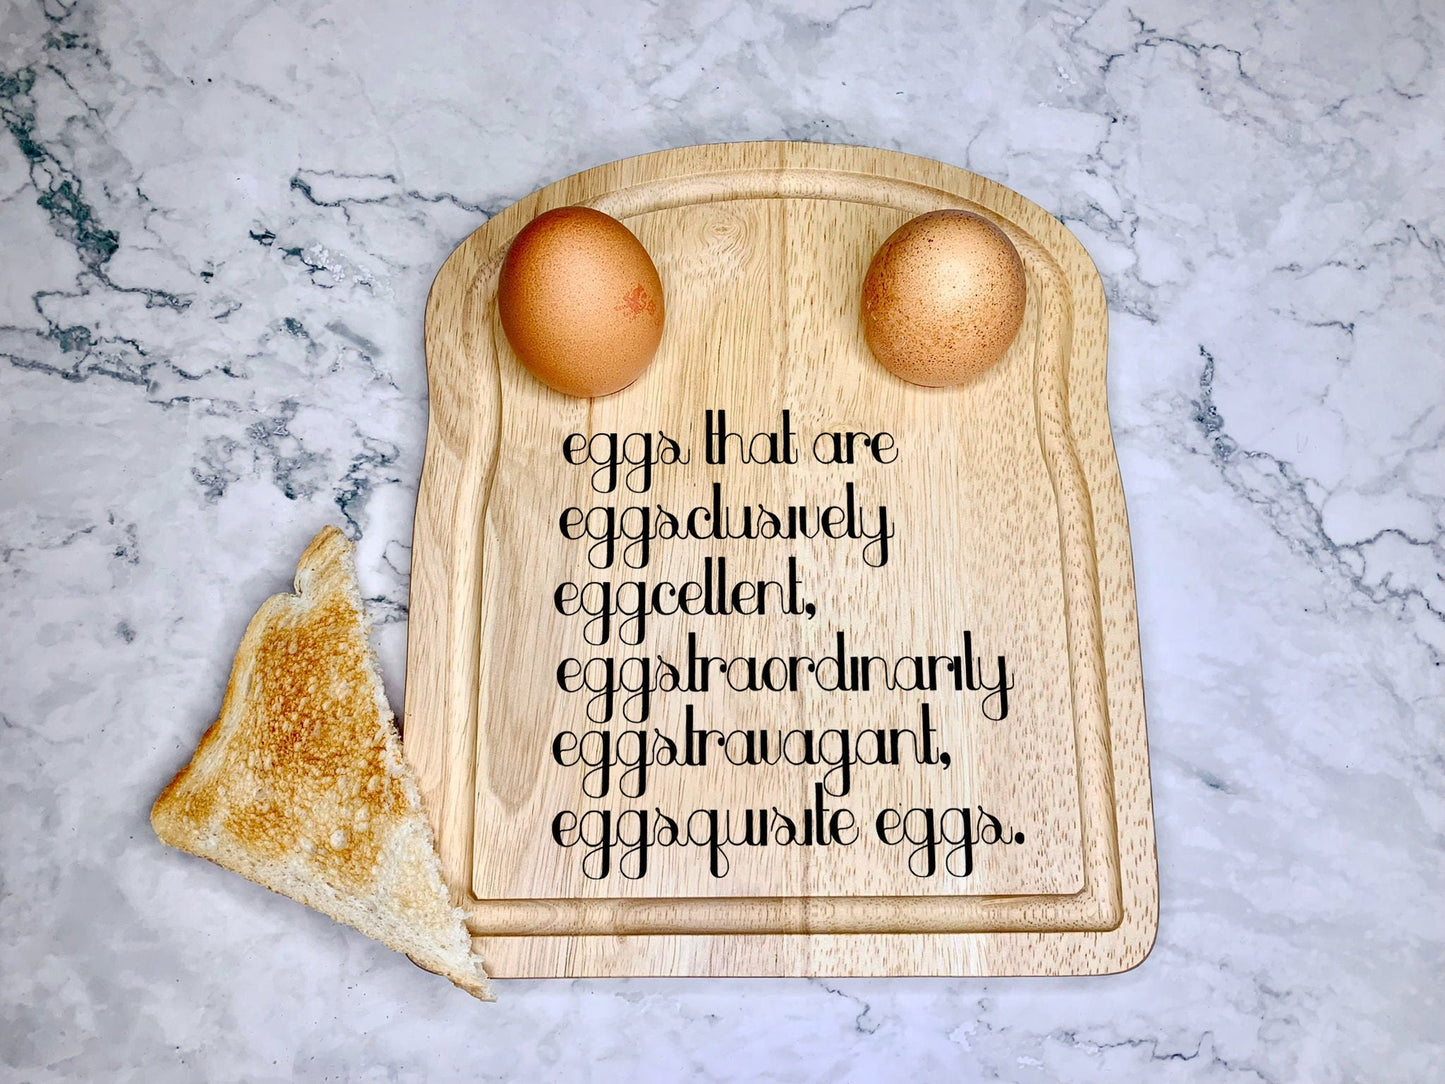 Egg Pun Eggs & Soldiers Wooden Egg and Toast Board - Resplendent Aurora